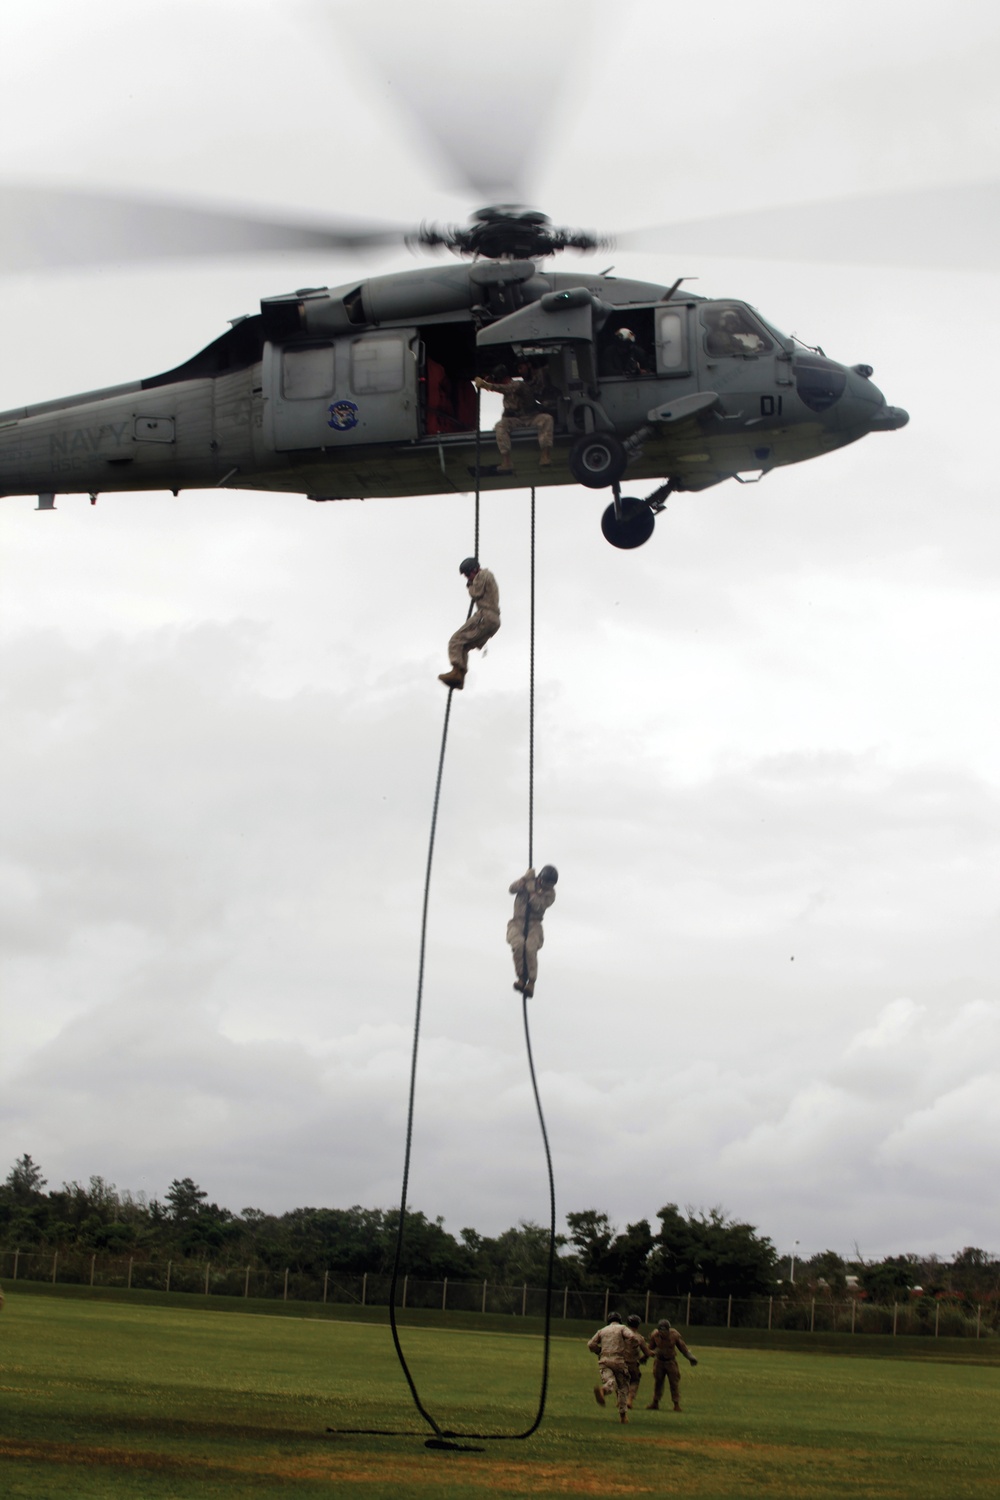 DVIDS - News - Marines plan, rig, execute fast-rope drills